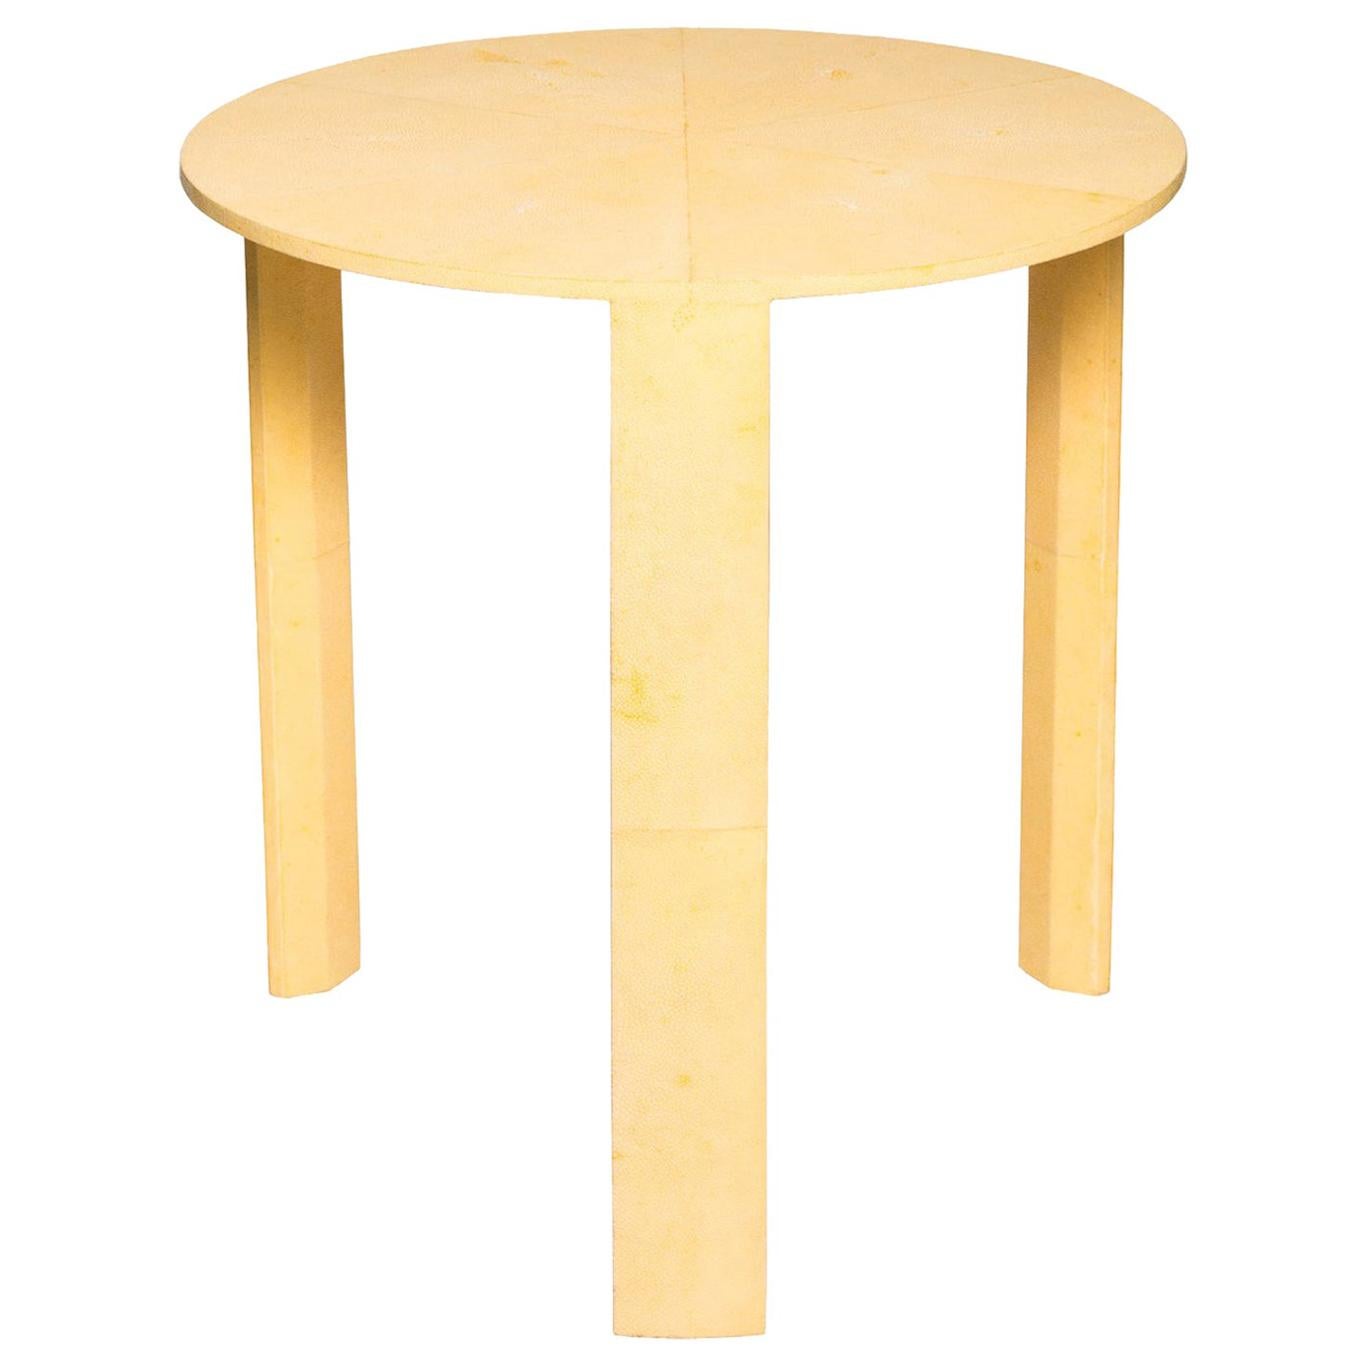 Contemporary Authentic Shagreen Round Table in Canary Yellow